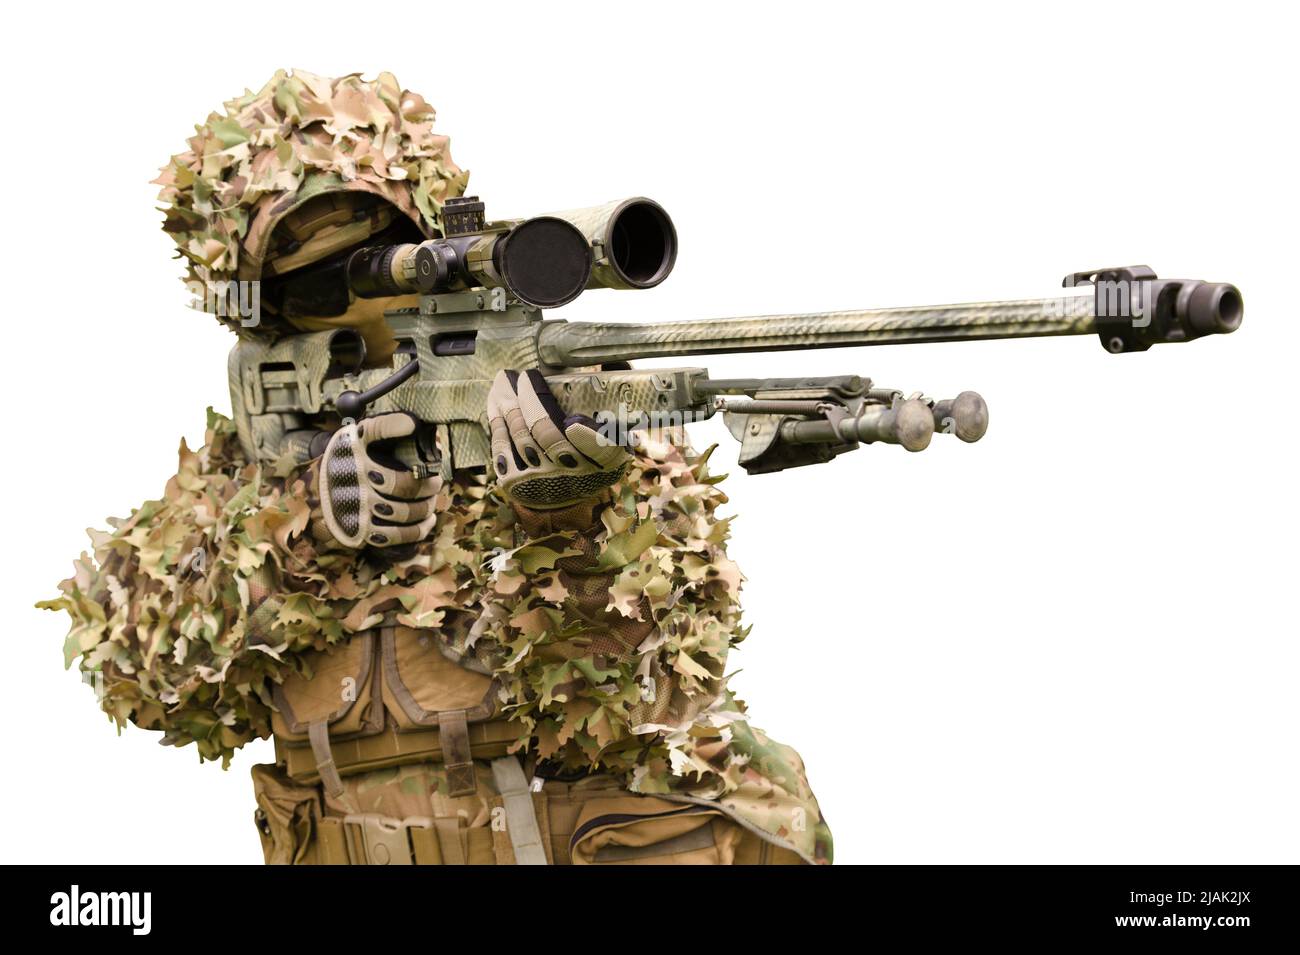 Soldier with sniper rifle, ready to shoot, isolated on white background. Stock Photo